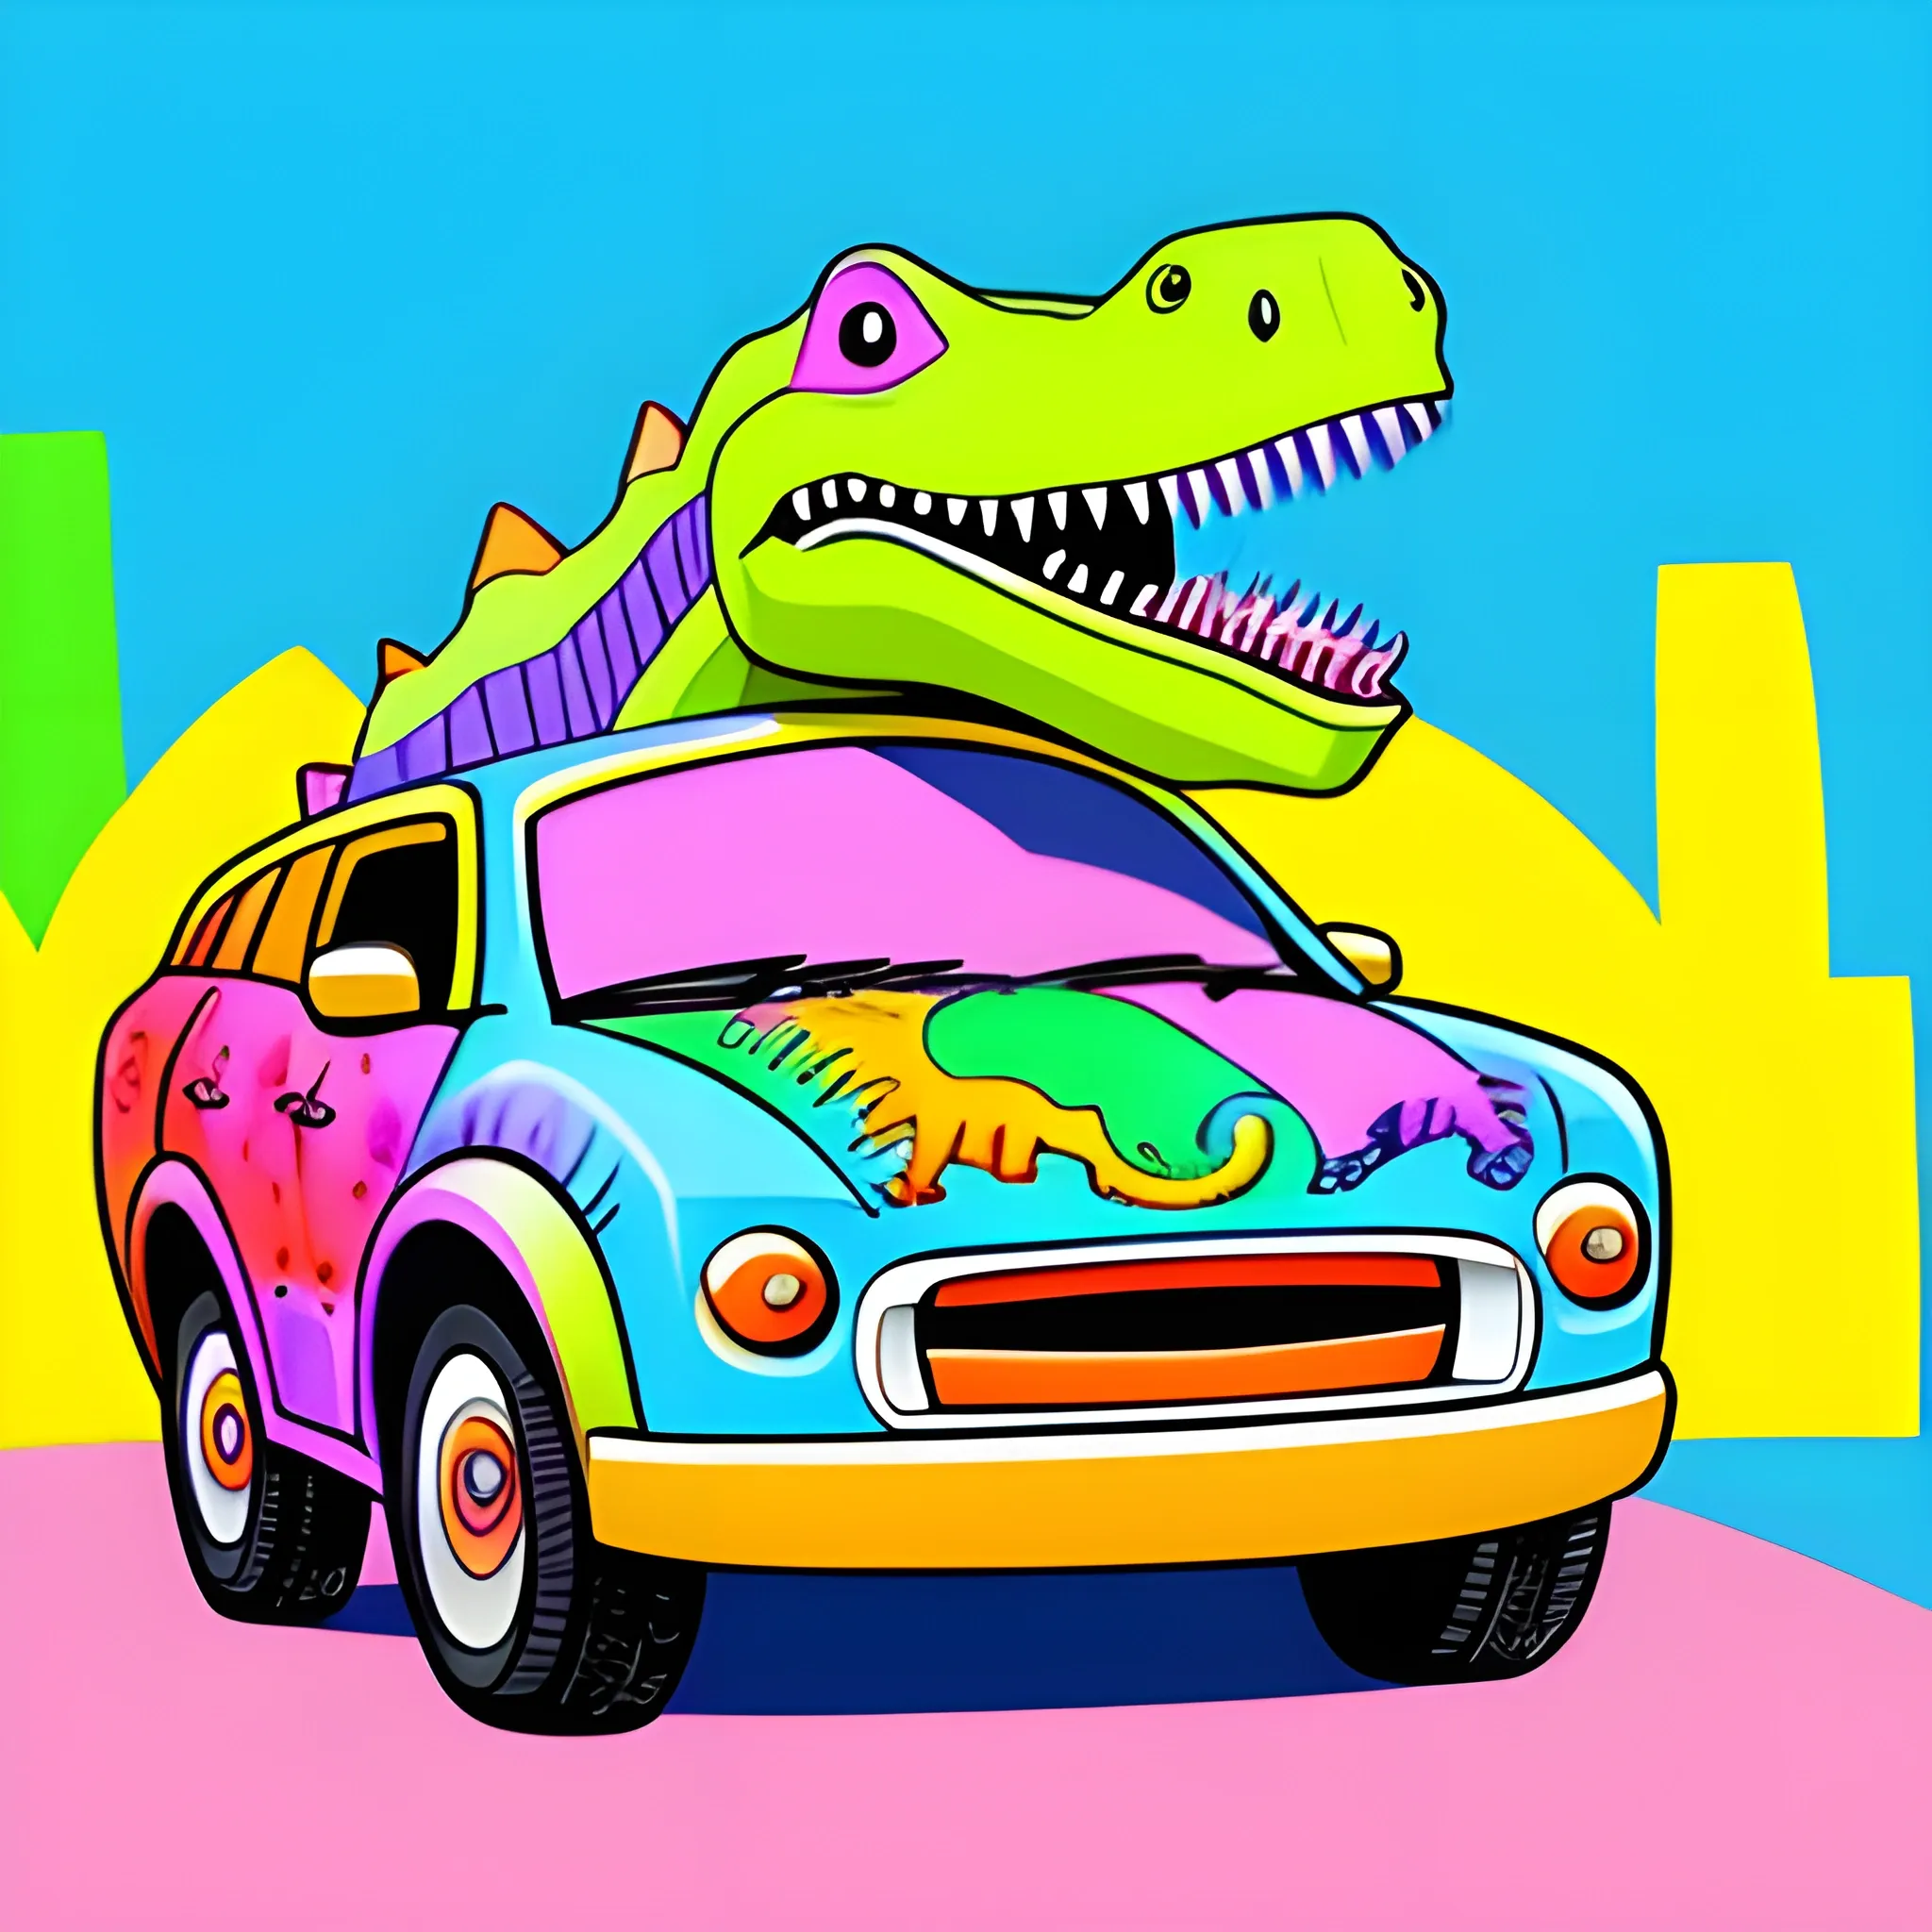 A funny smiling dinosaur into a colorful and happy car to paint